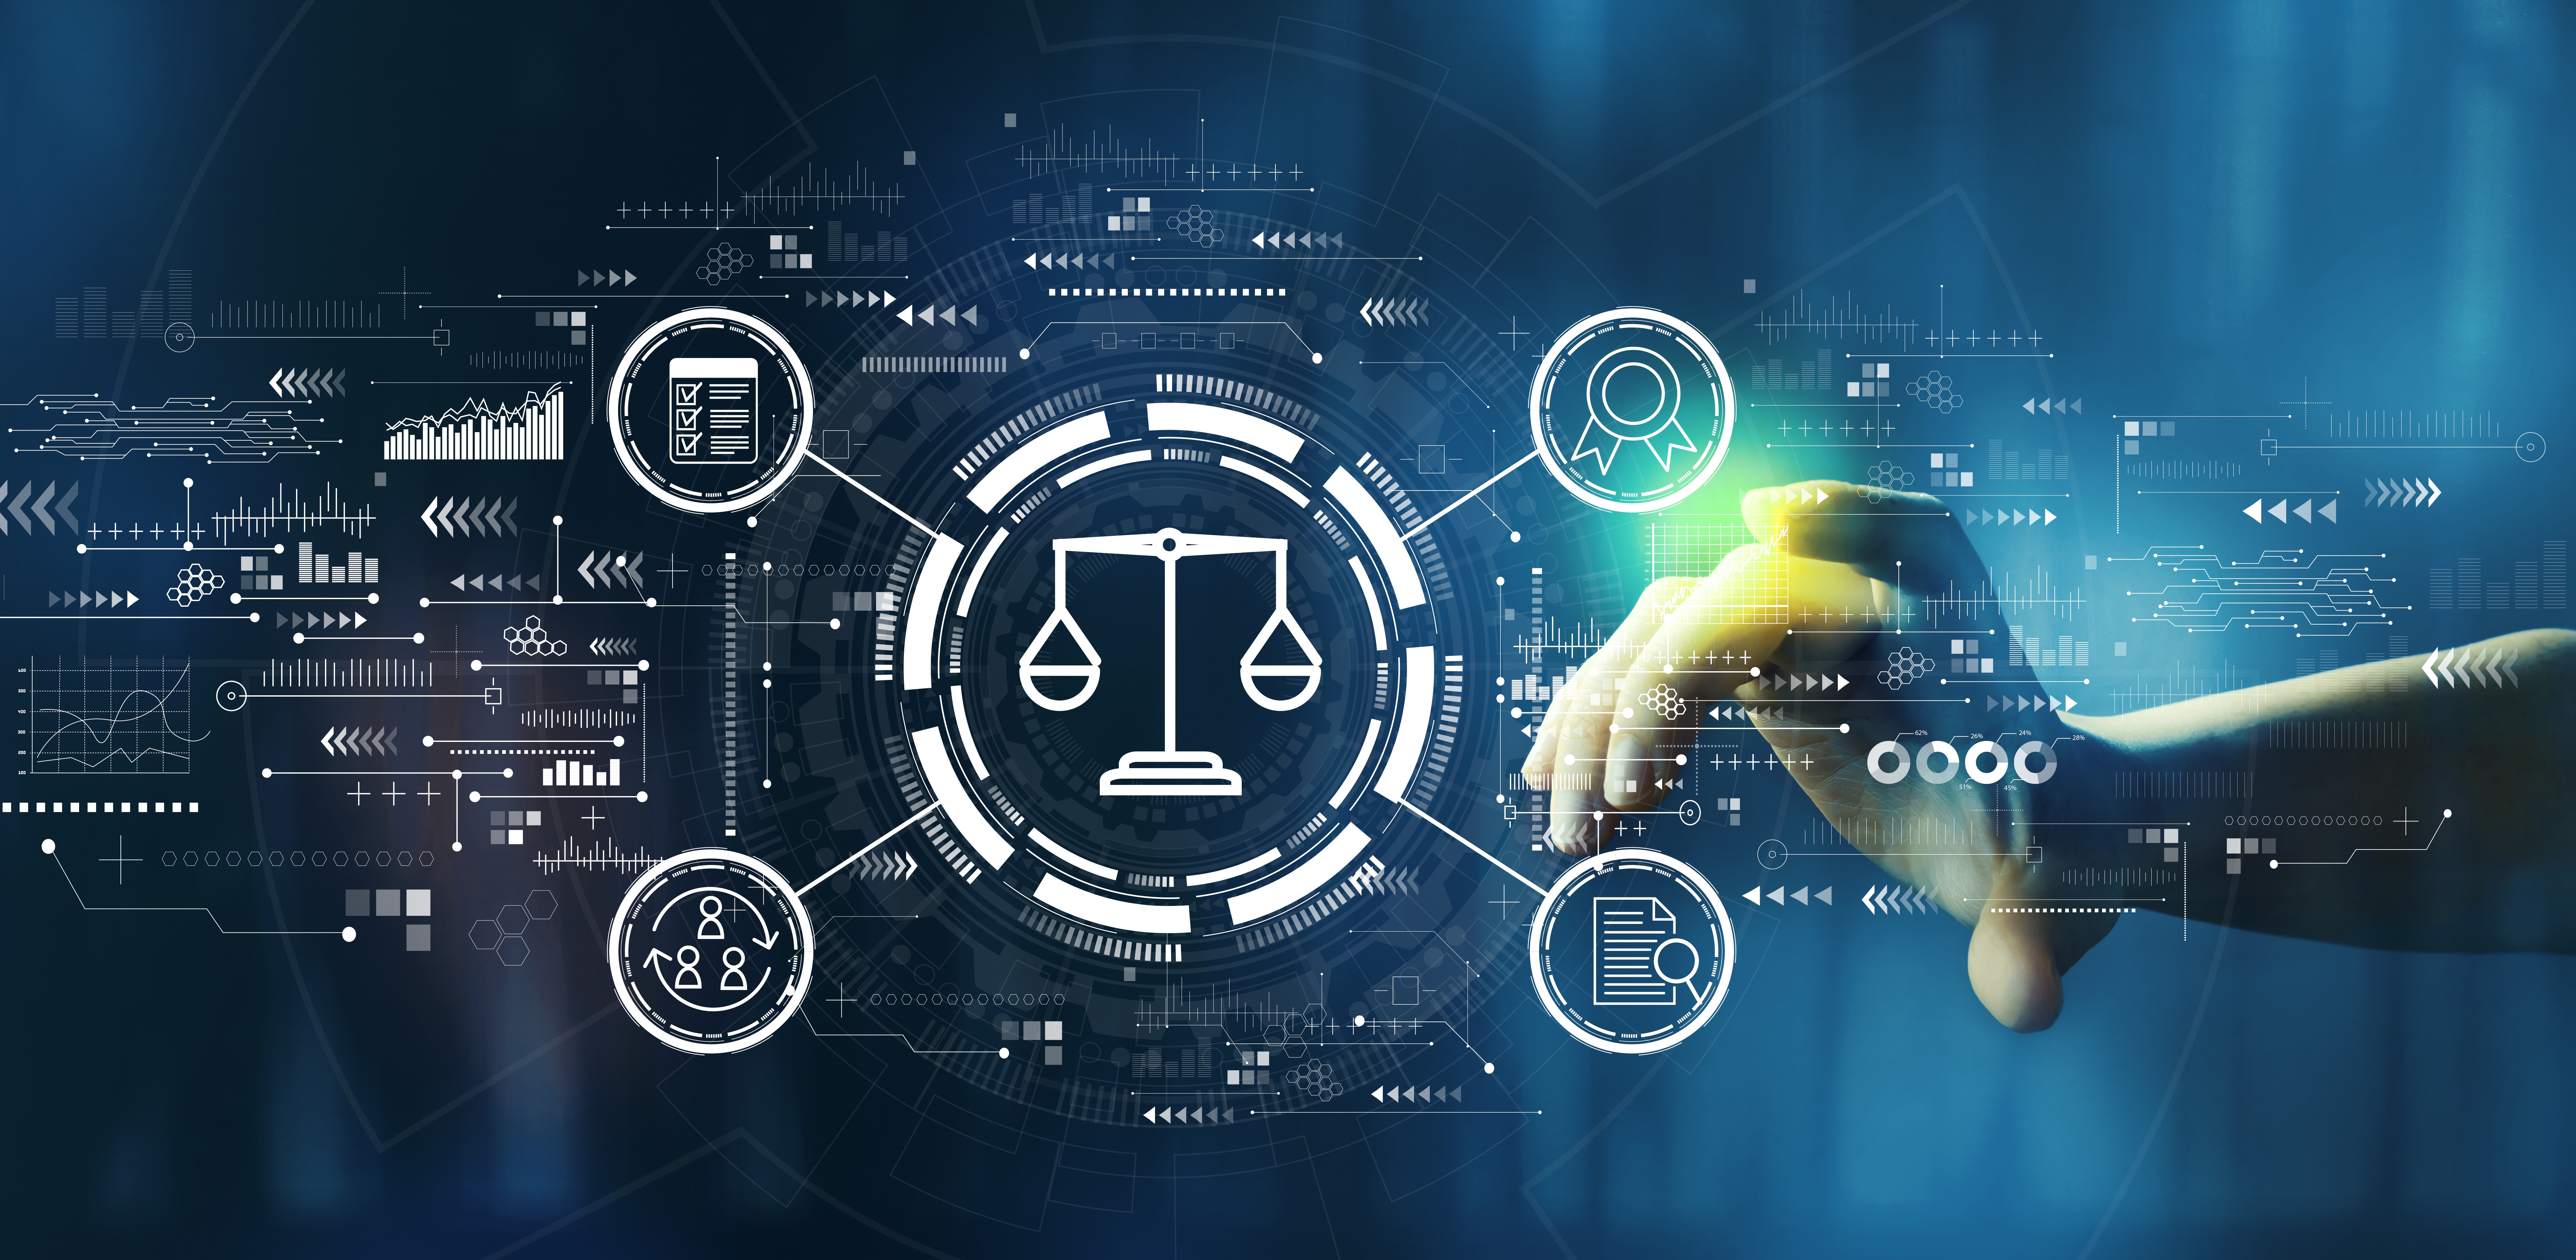 a legal scale digital image with a hand reaching out to the icons suggesting the use of AI for legal purposes